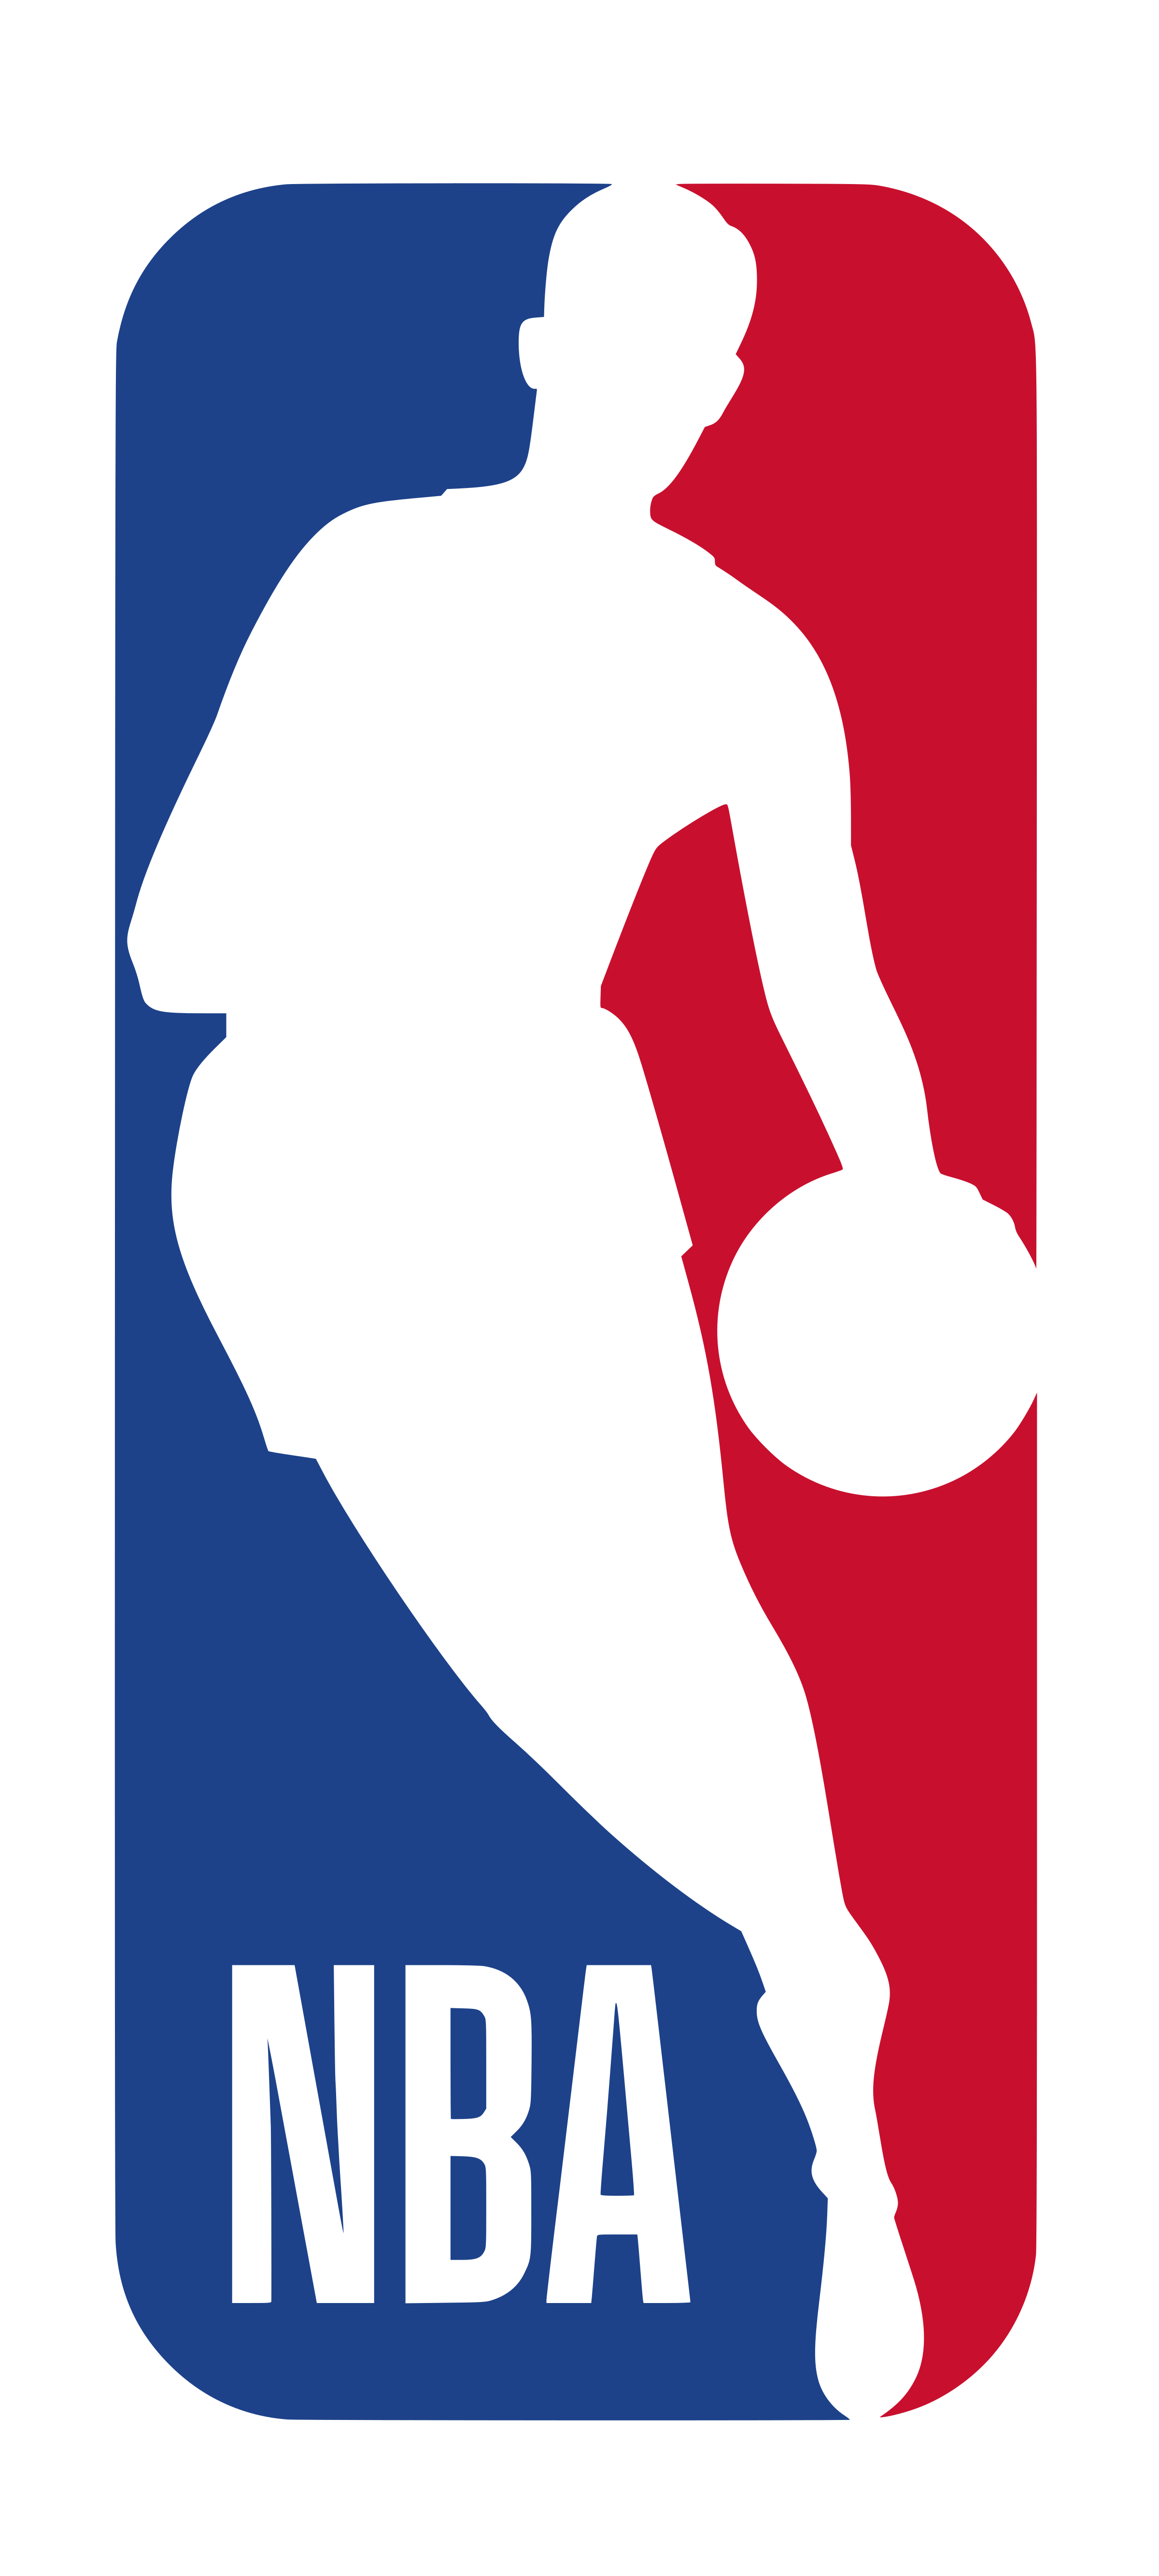 Emergency clipart collage. Image result for nba